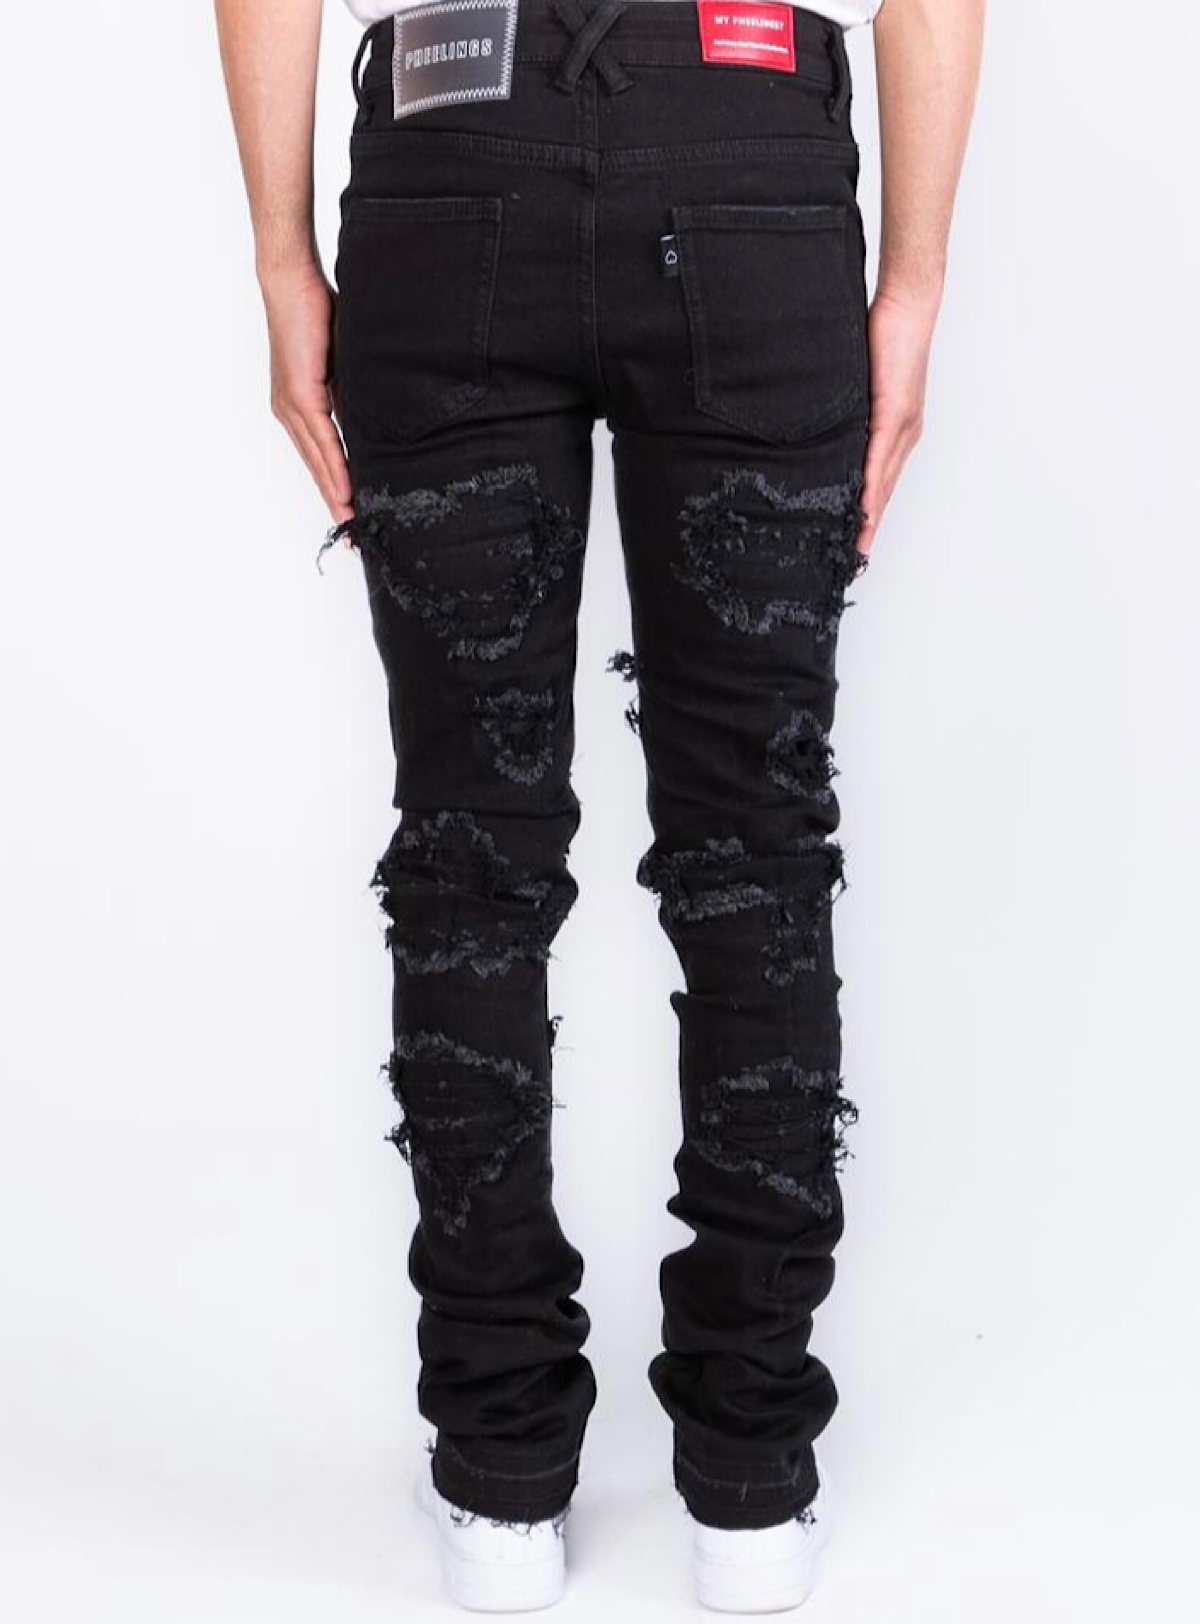 Pheelings Jeans - Seize The Day Flare Stack - Jet Black - PH-SS22-81 ...